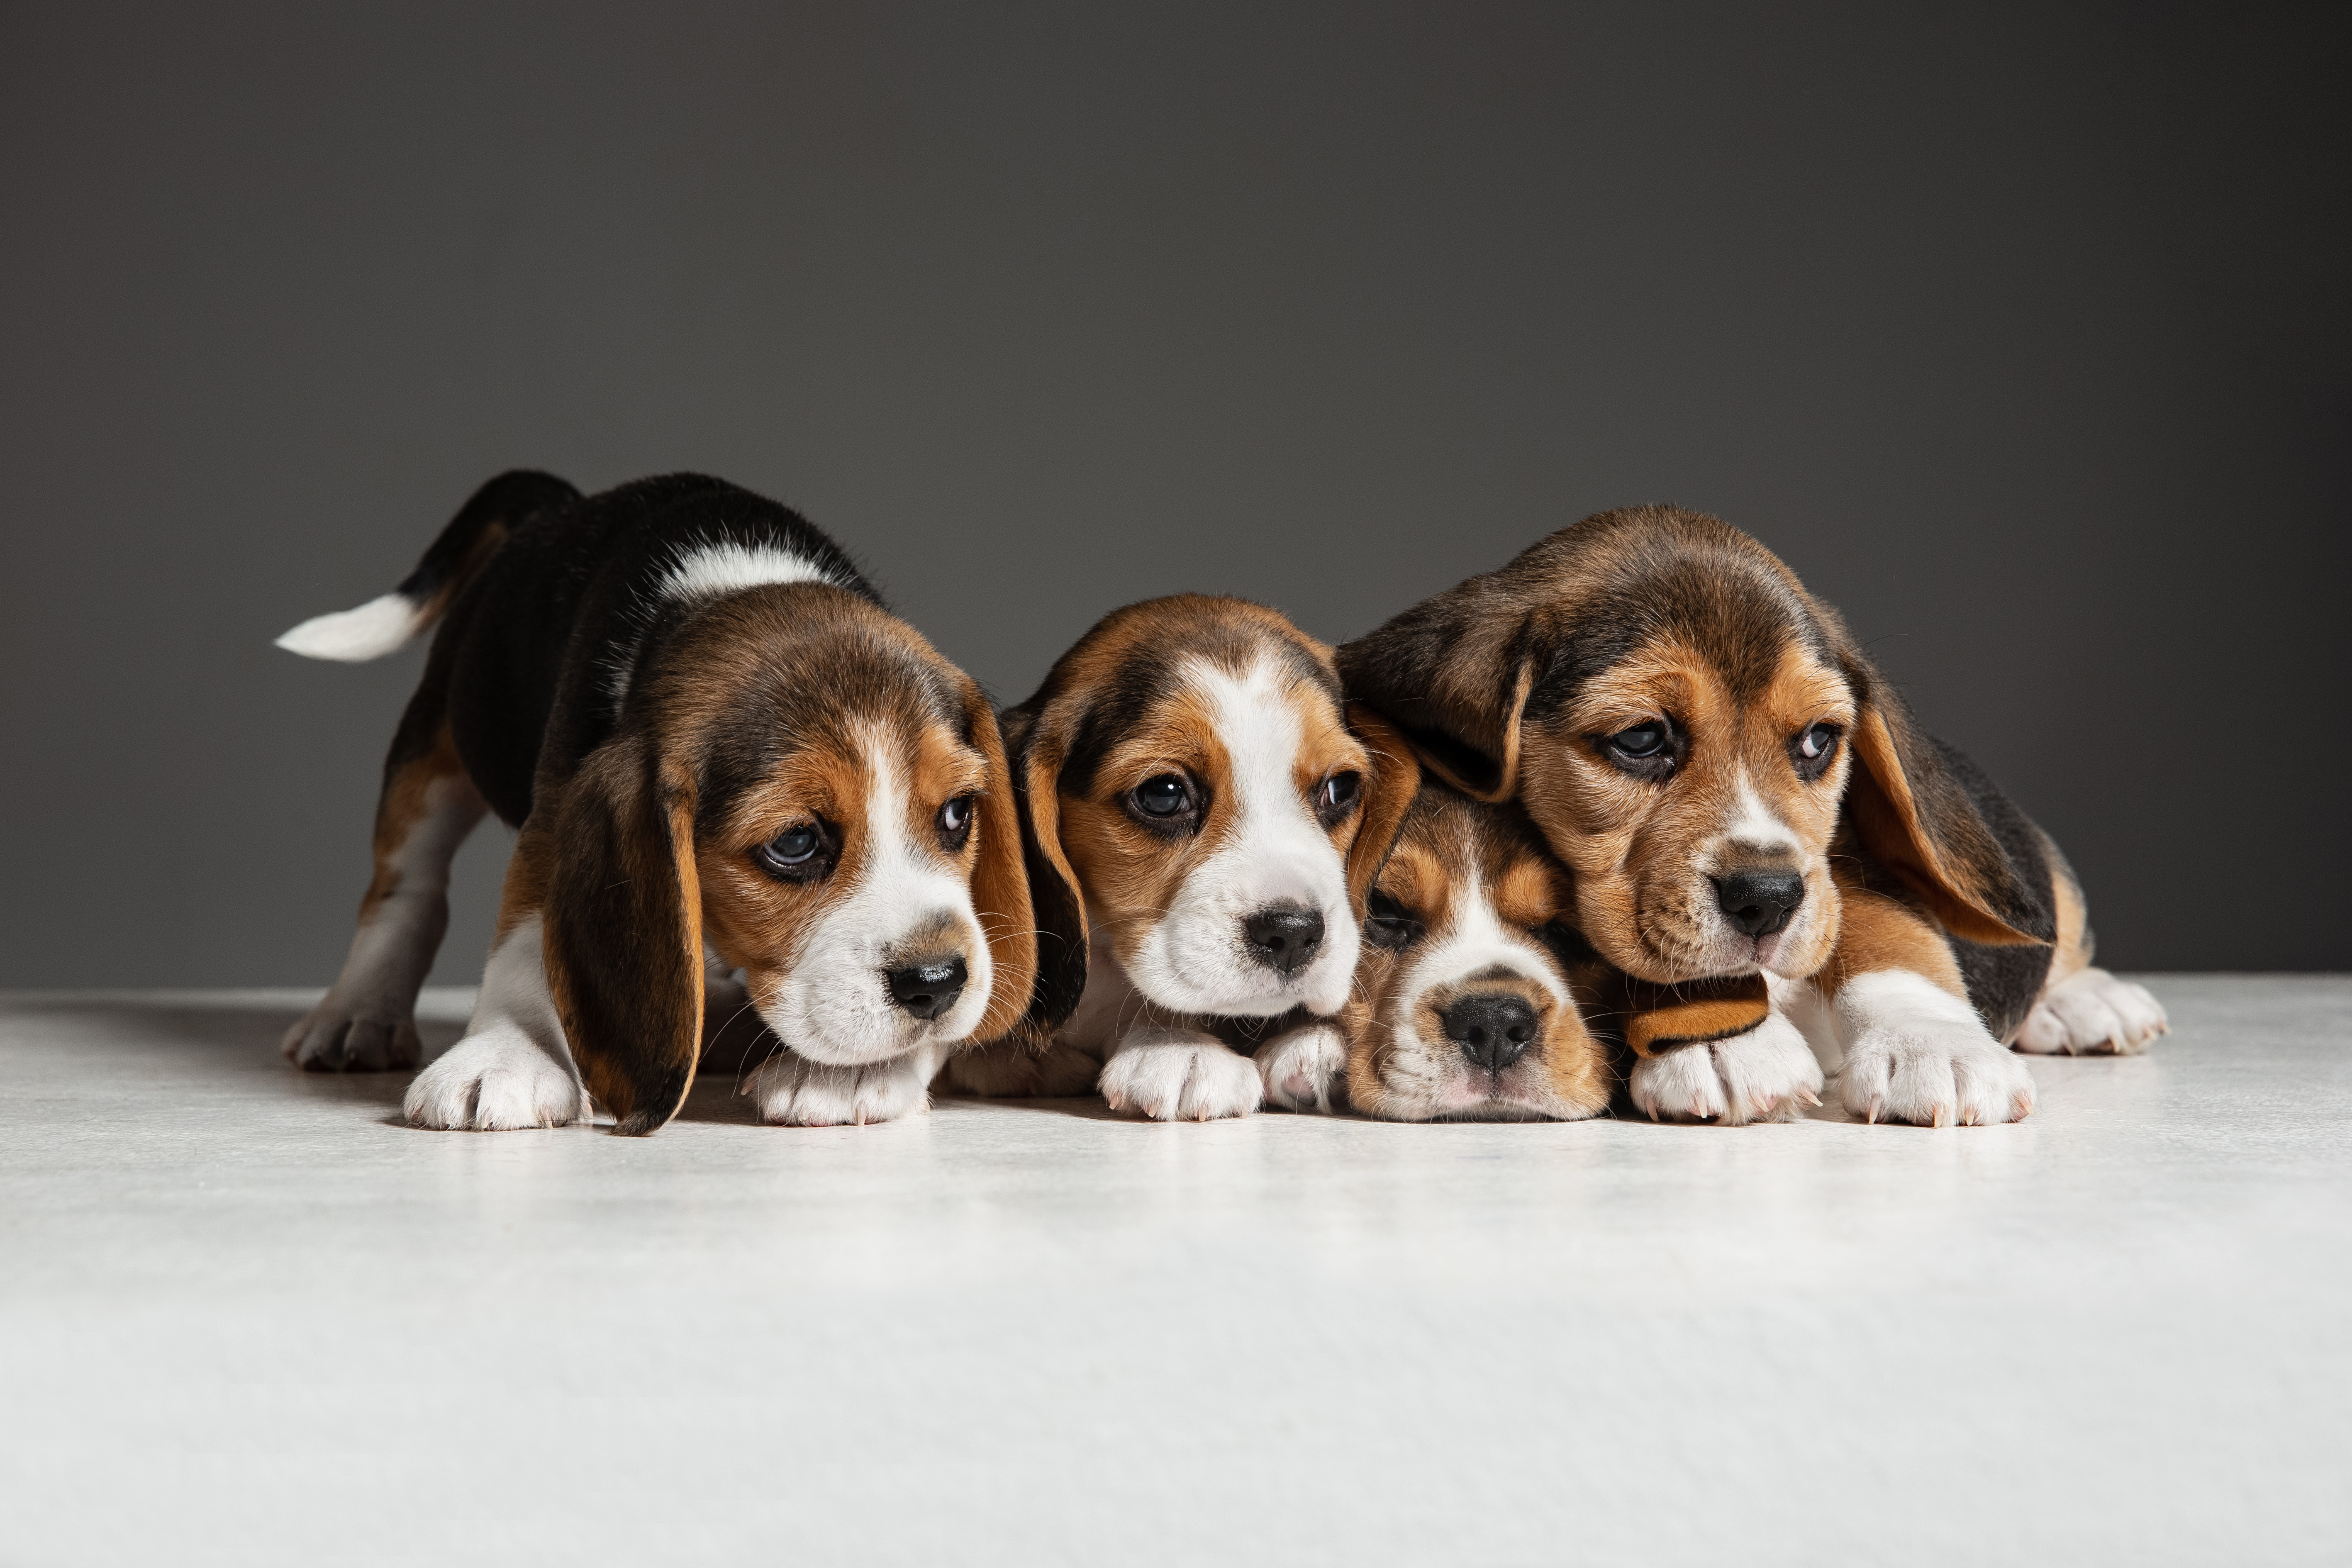 Wallpapers animal puppy beagle on the desktop